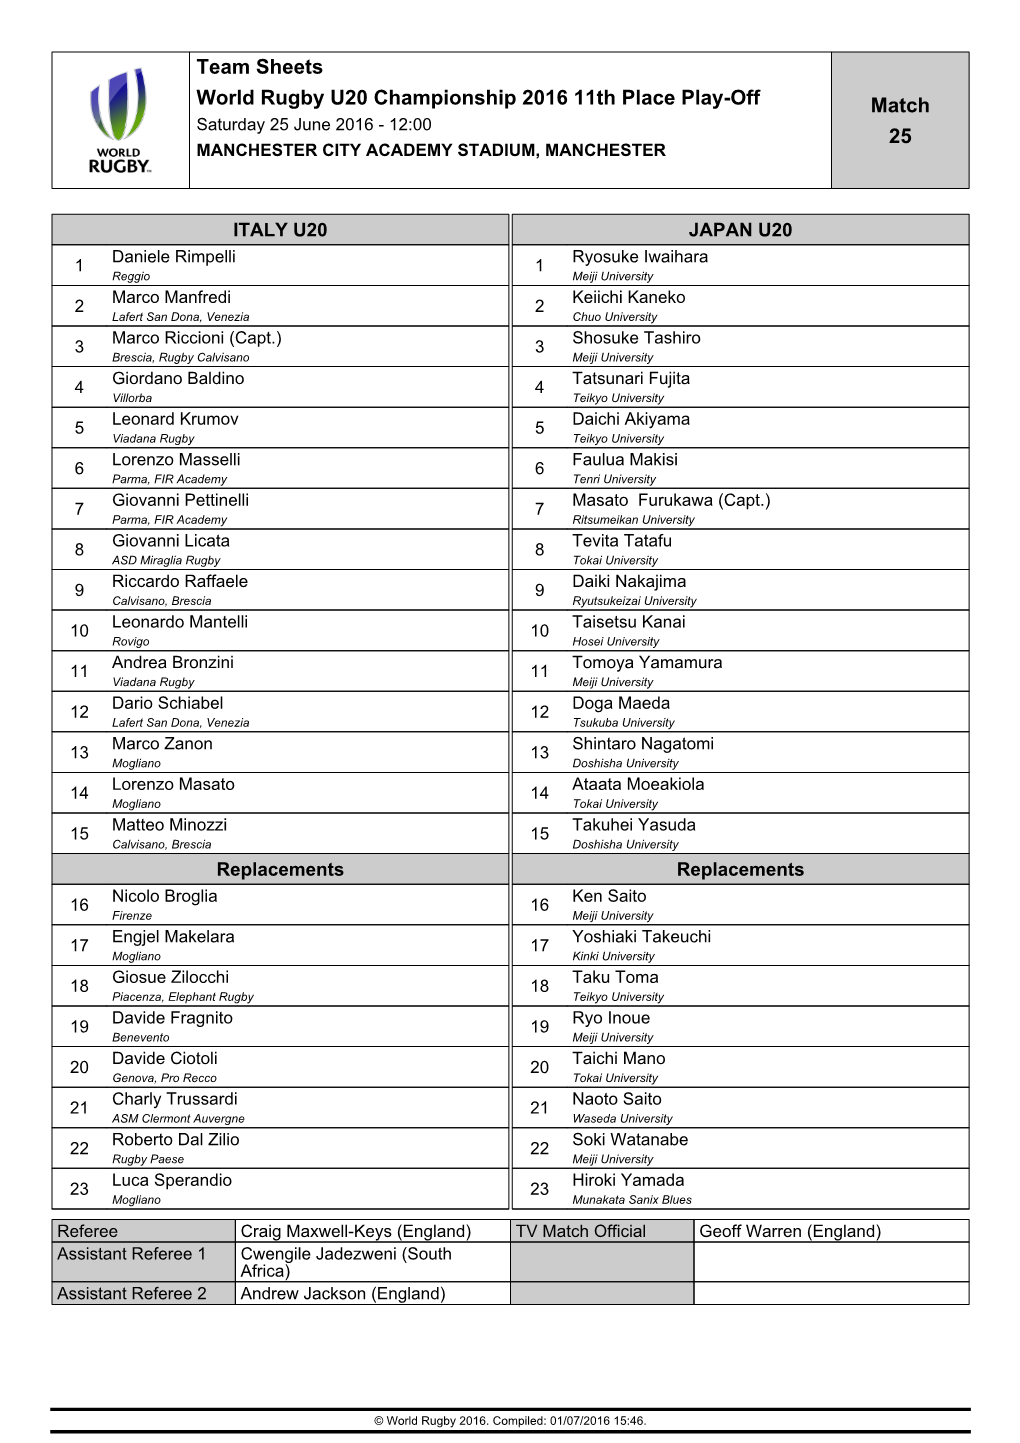 Team Sheets World Rugby U20 Championship 2016 11Th Place Play-Off Match Saturday 25 June 2016 - 12:00 25 MANCHESTER CITY ACADEMY STADIUM, MANCHESTER